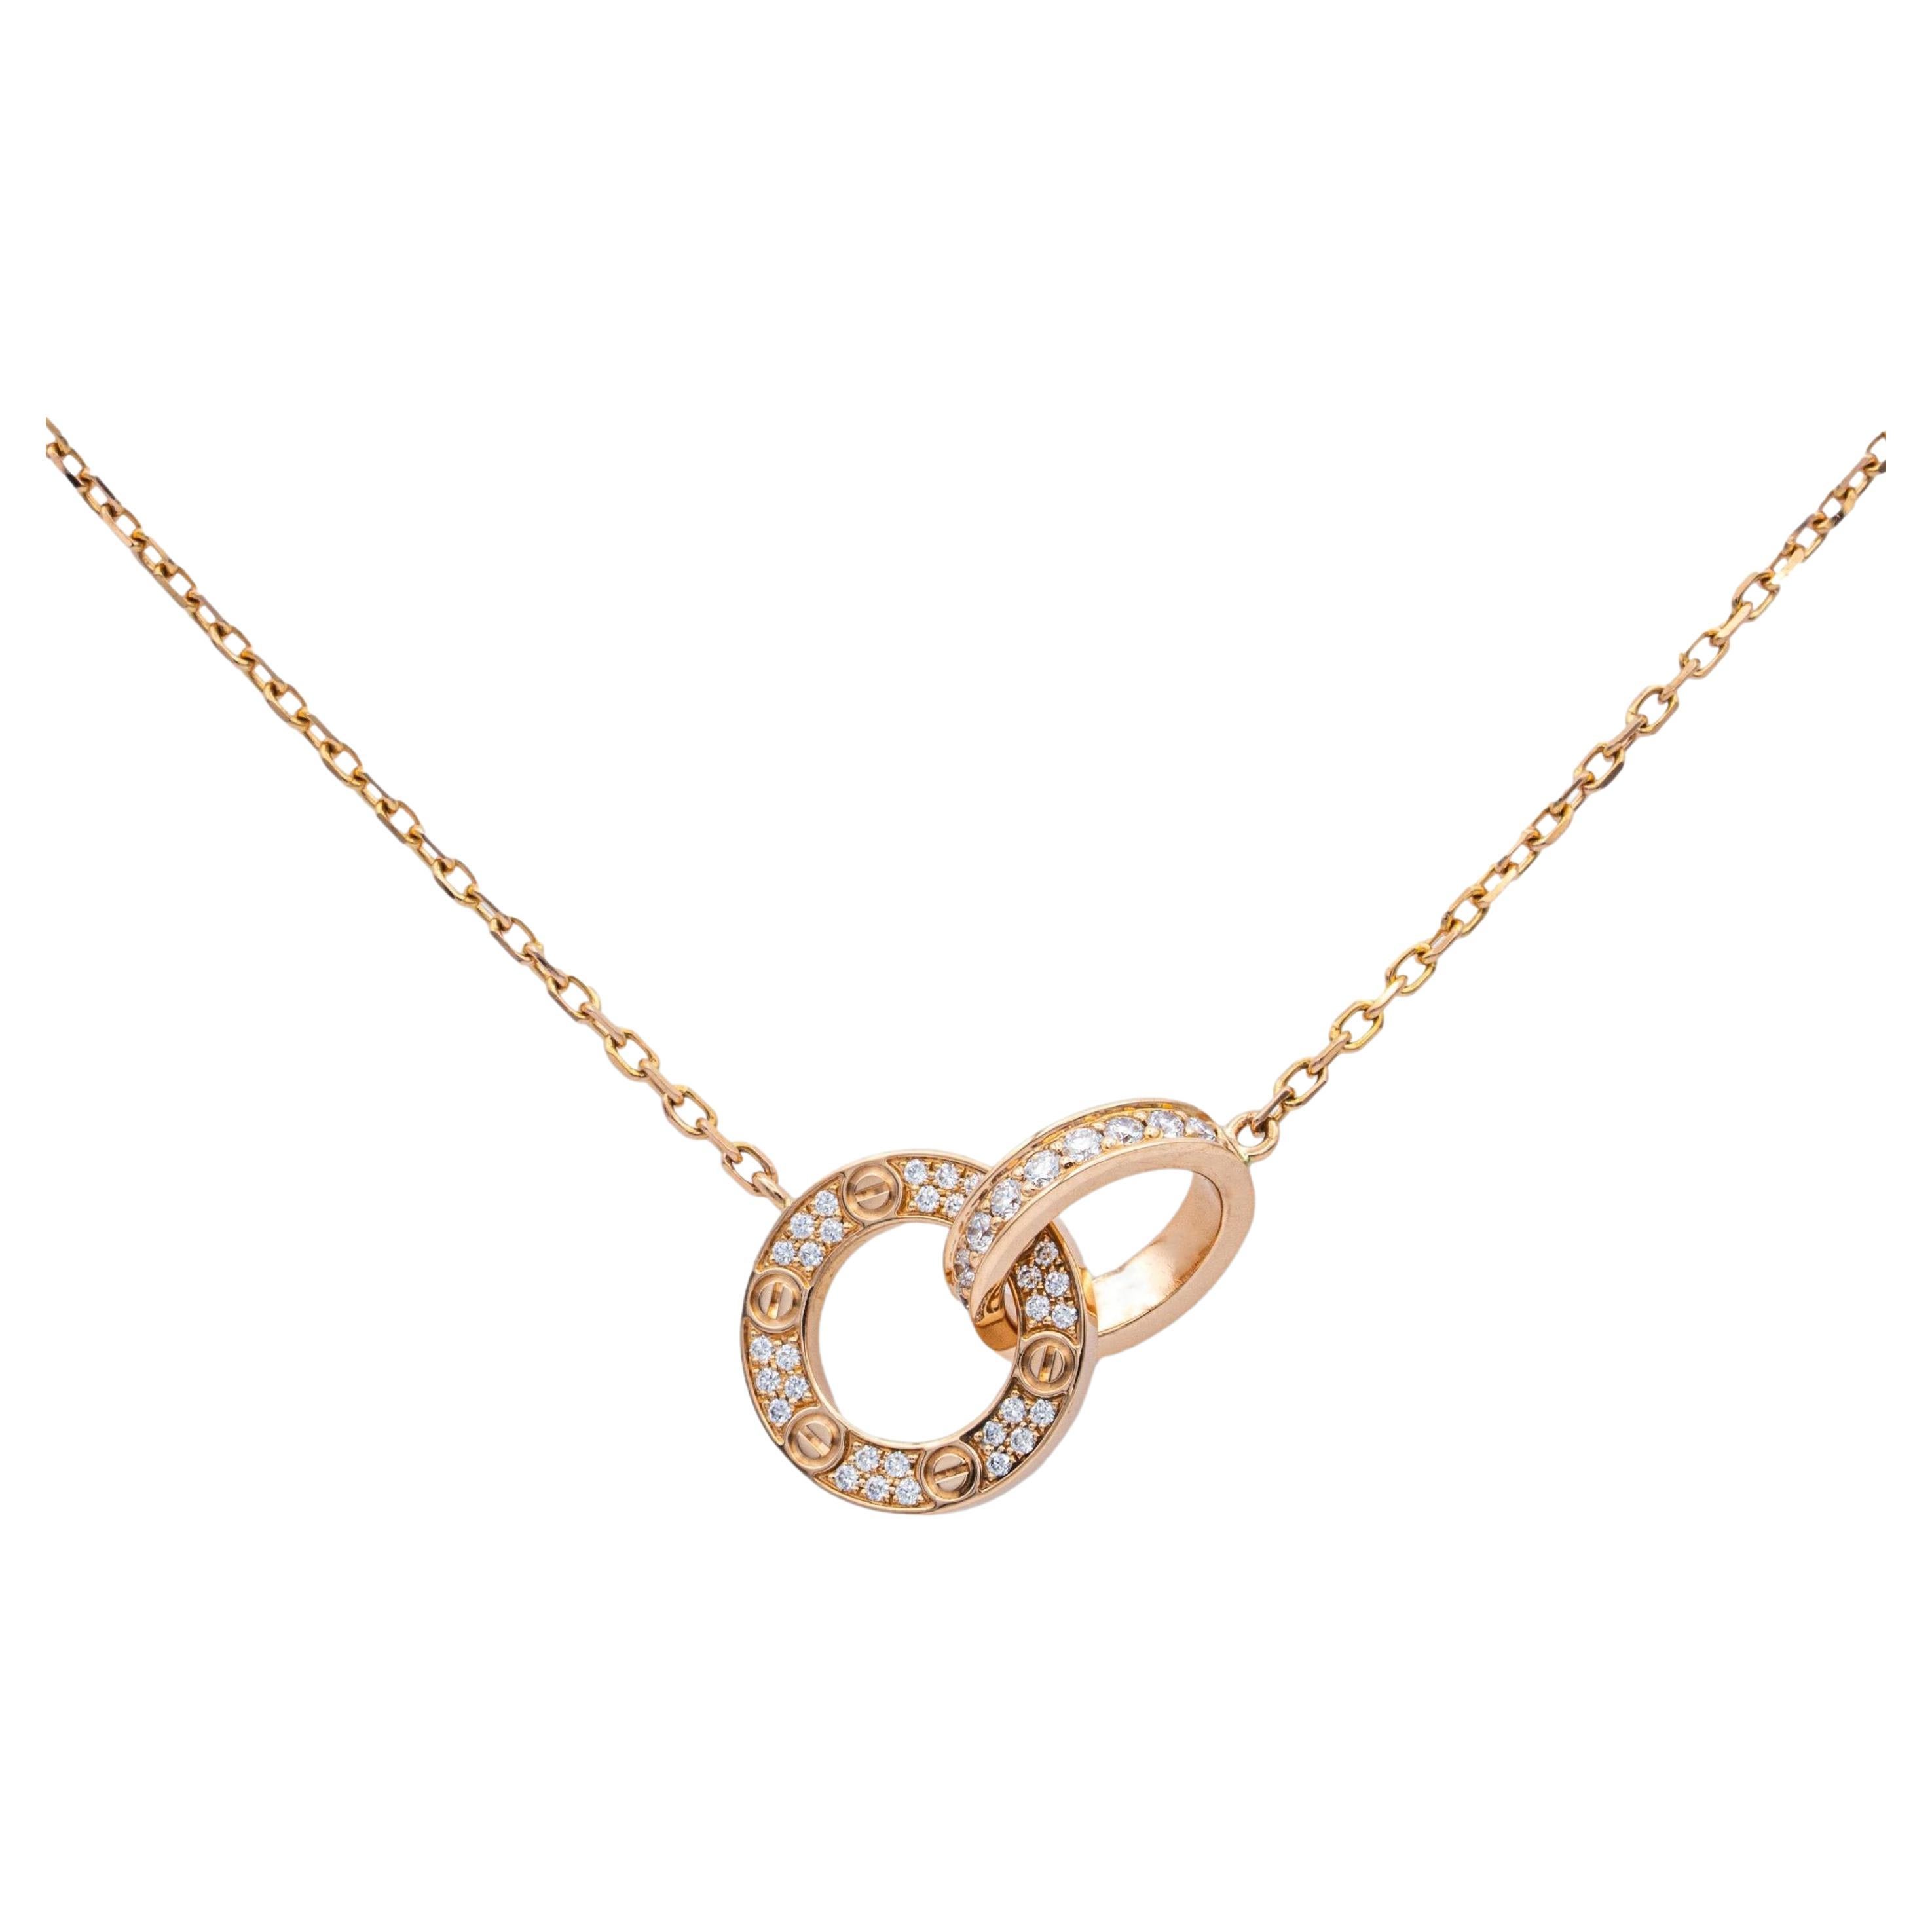 Cartier 18k Rose Gold Love Necklace With Diamonds For Sale At 1stdibs